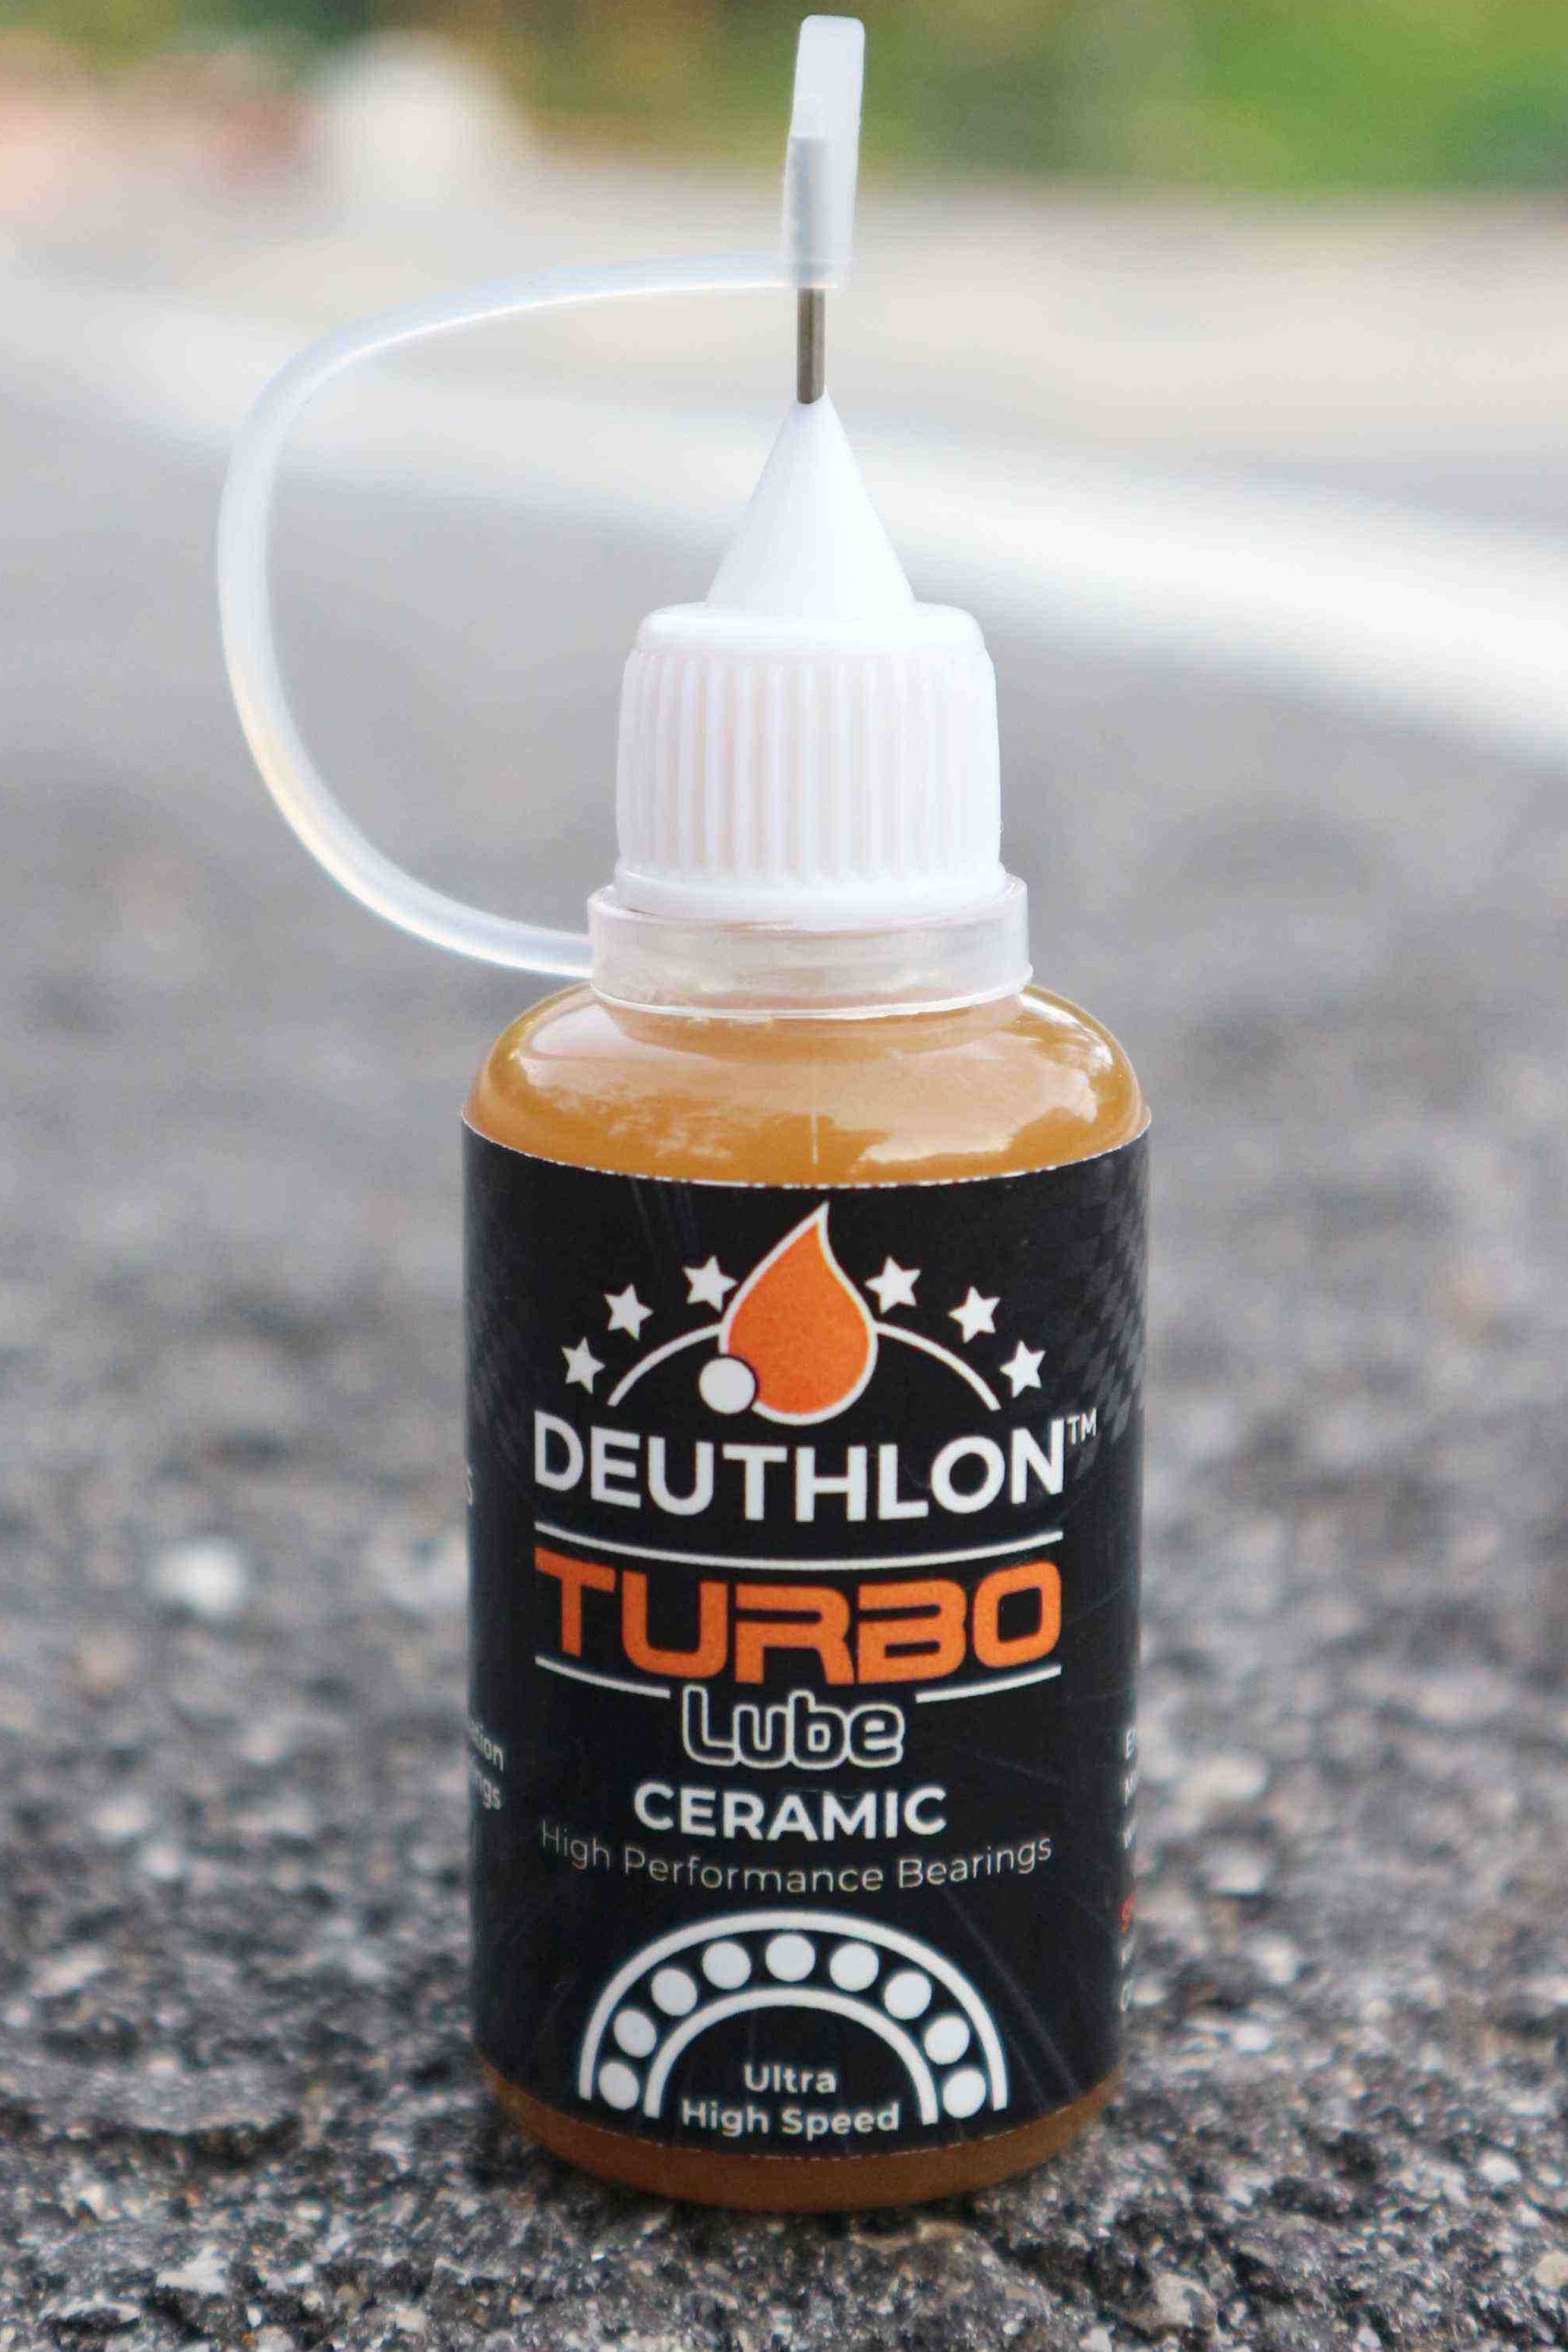 Turbo Lube | Use this to break your own personal record. Designed for Racing. - Deuthlon